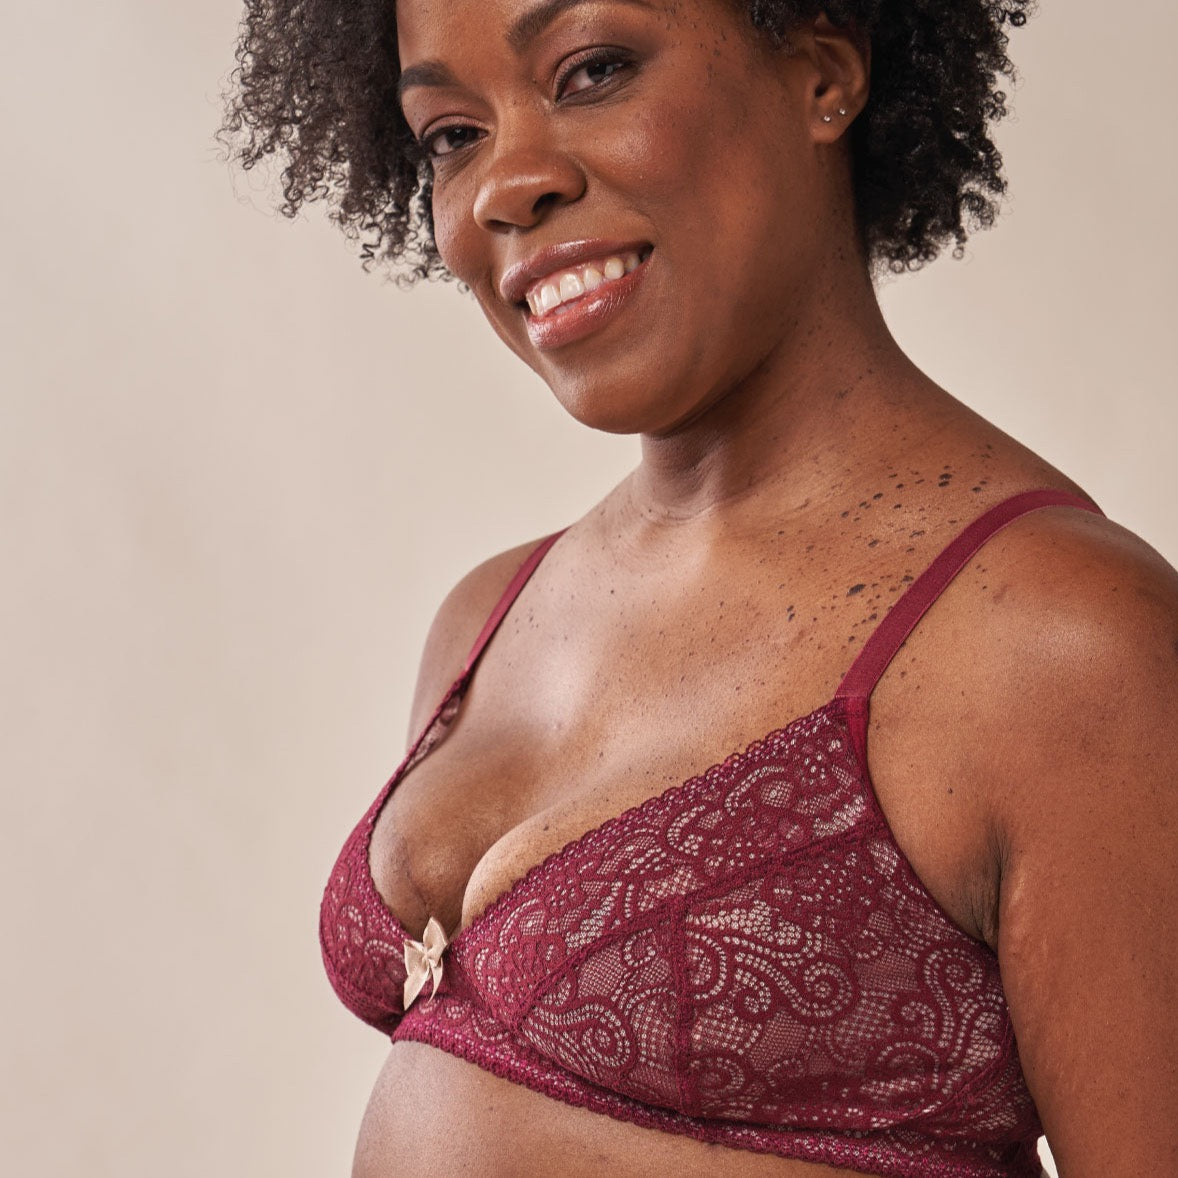 Gloria Pocketed Lace Bra in Wine | Mastectomy Lingerie by AnaOno